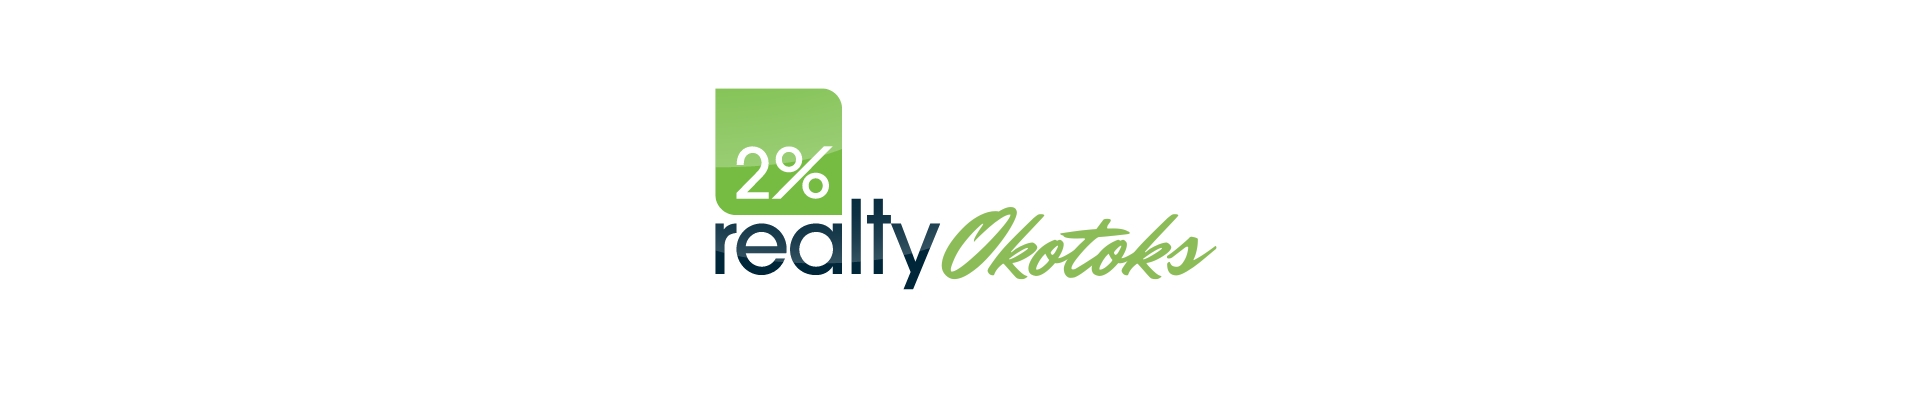 2 Percent Realty Okotoks Real Estate Services. 2% Realty and 2percentrealty